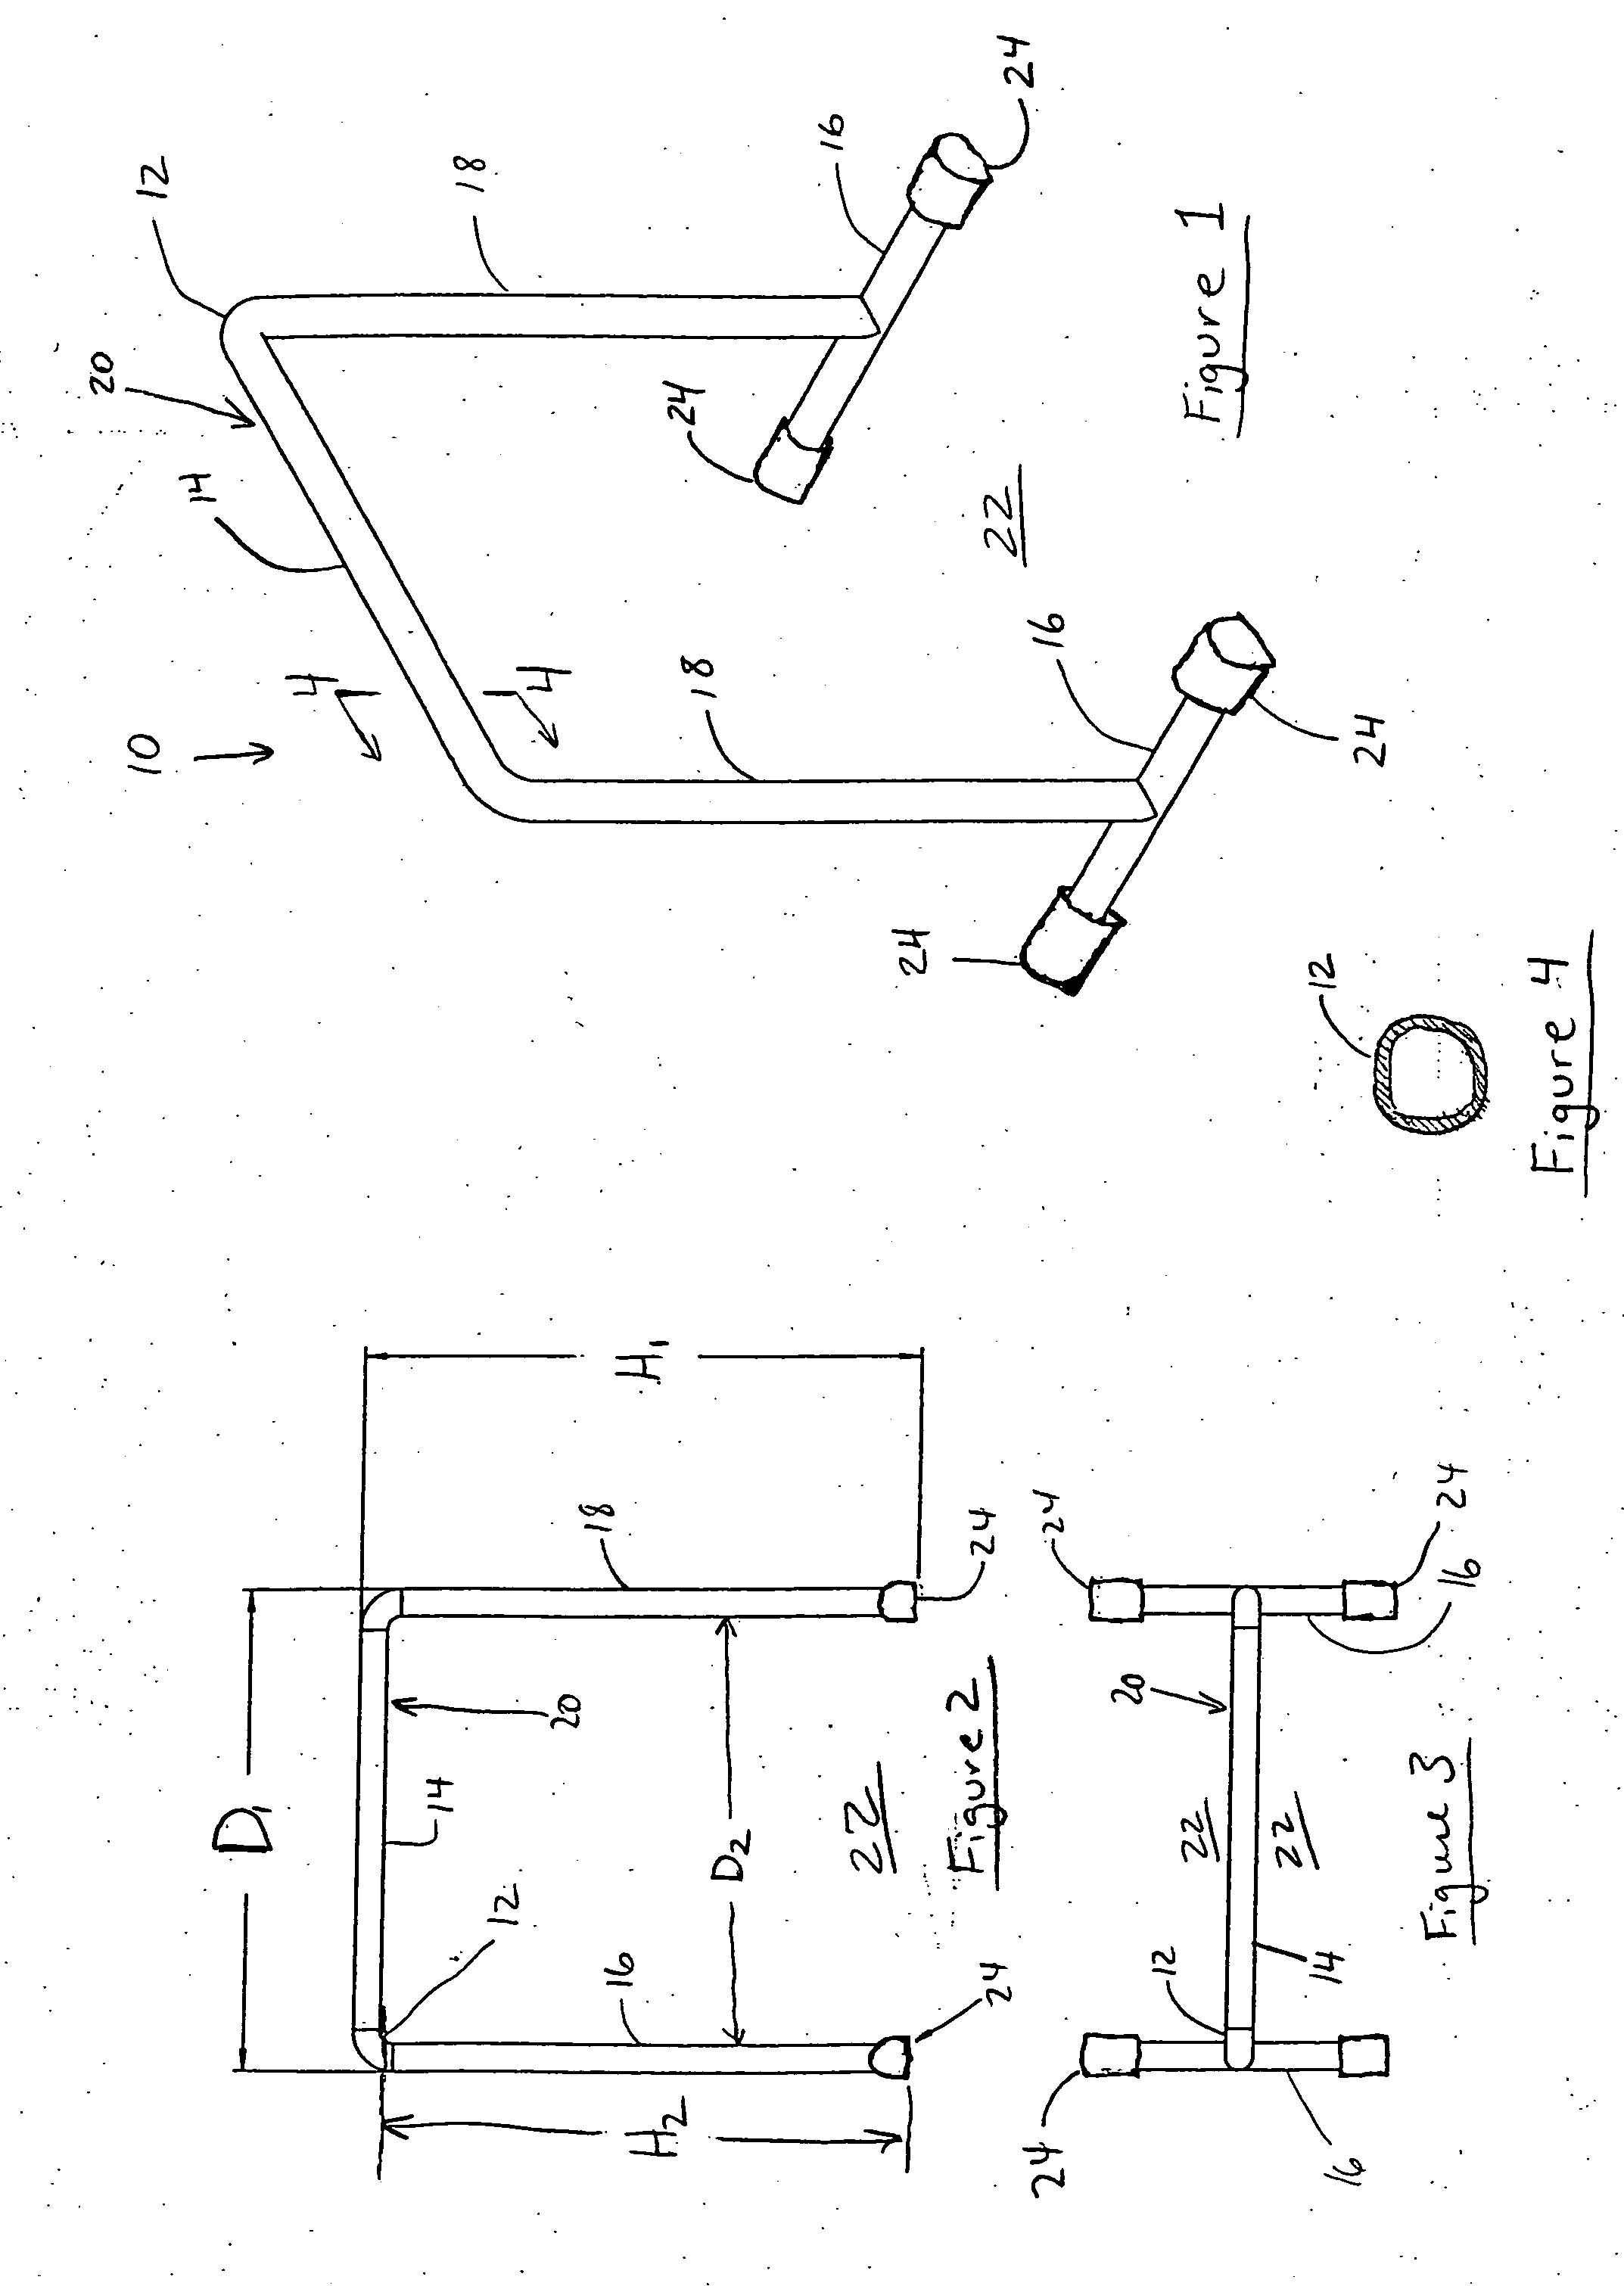 Exercise device and system